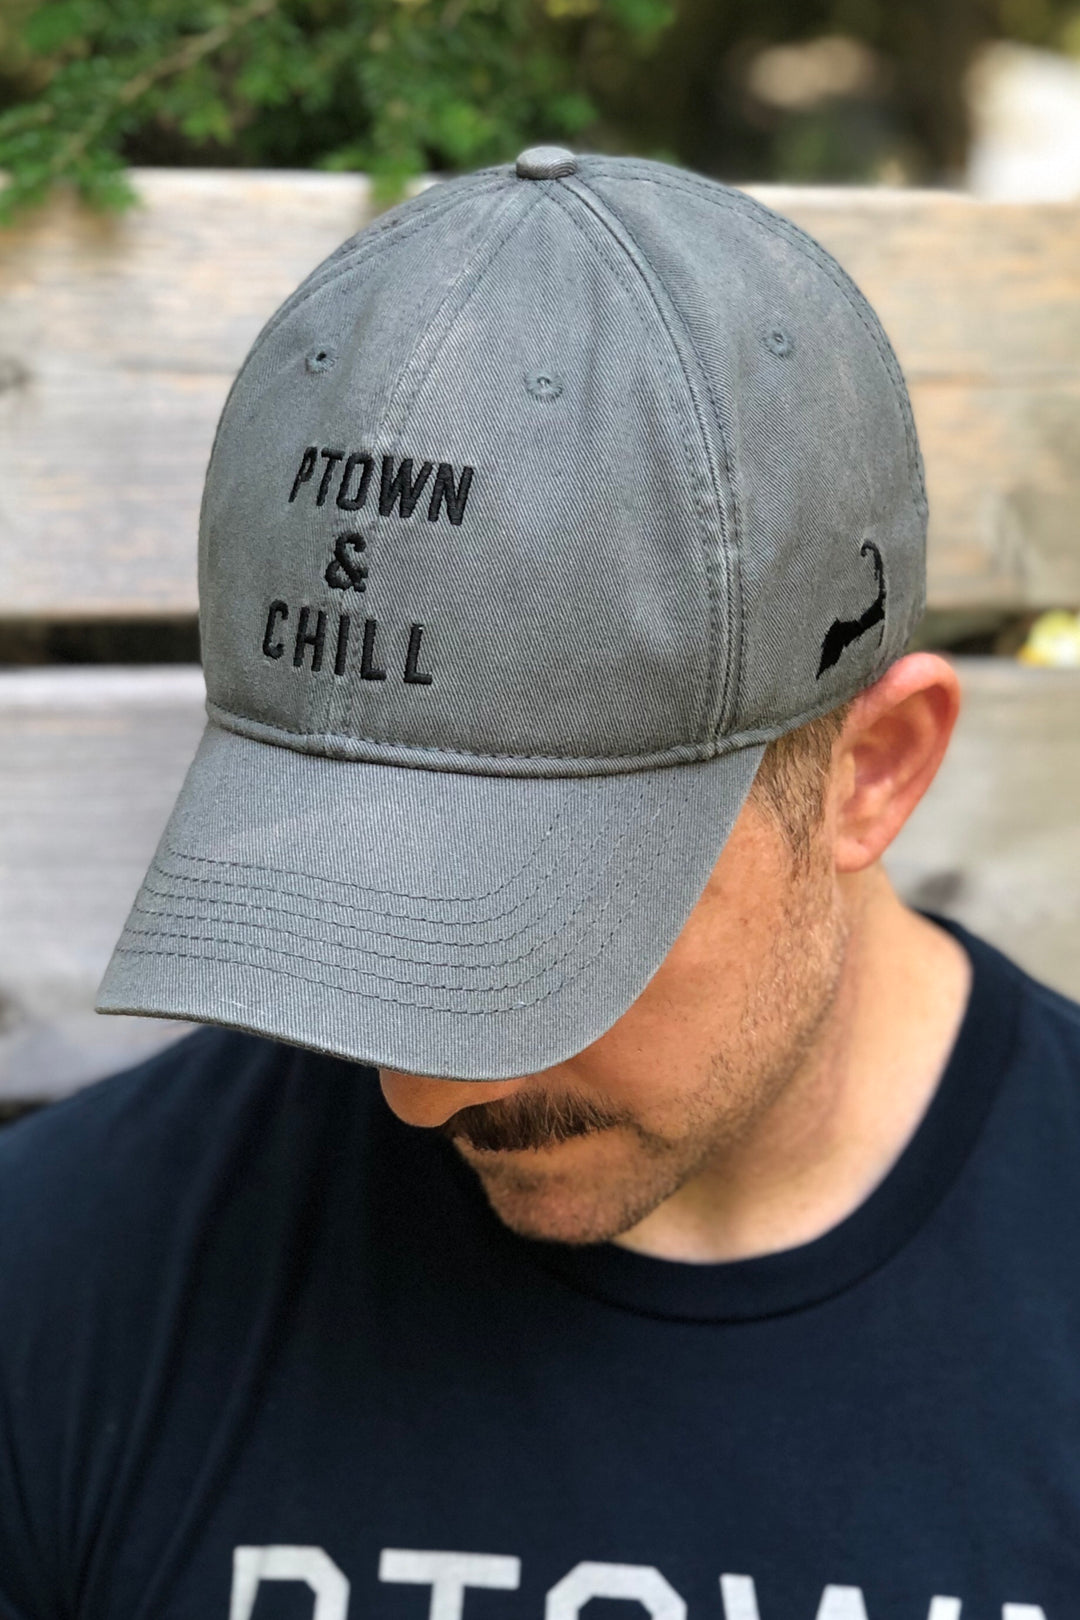 Ptown & Chill - Washed Twill Hat